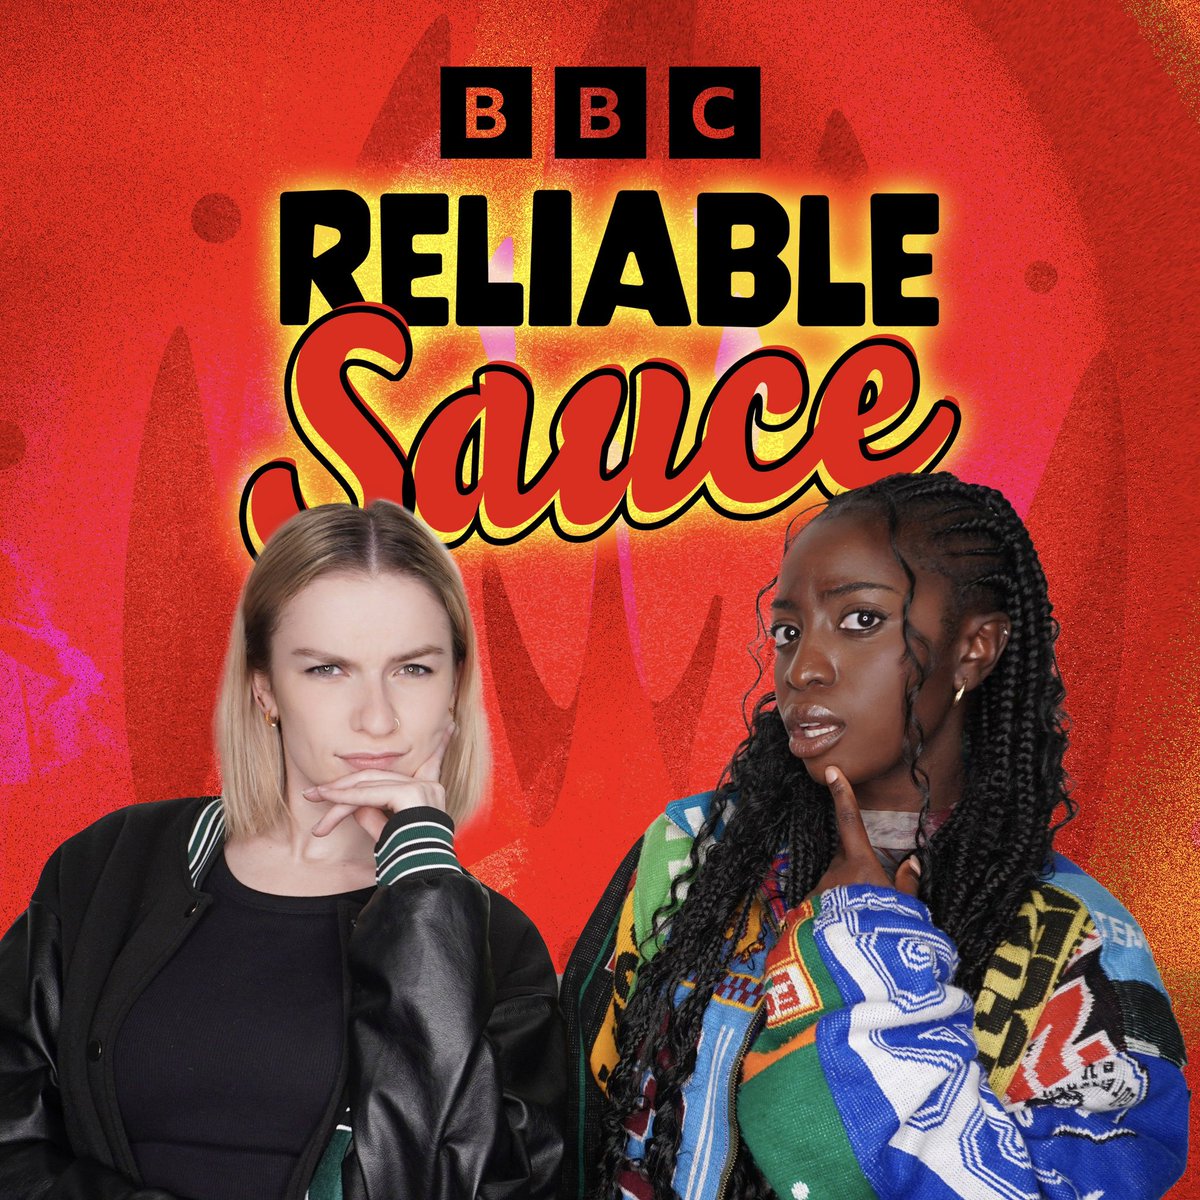 WE HAVE A PODCAST ❤️‍🔥🌶️ Wanna know wtf is going on the news but cba to read it?! Join me & @JonelleAwomoyi every week for a debrief on Reliable Sauce @bbcsounds: bbc.co.uk/sounds/brand/p… @ApplePodcasts: podcasts.apple.com/us/podcast/rel… @spotify open.spotify.com/show/16LV0jwax… SUBSCRIBE NOW!